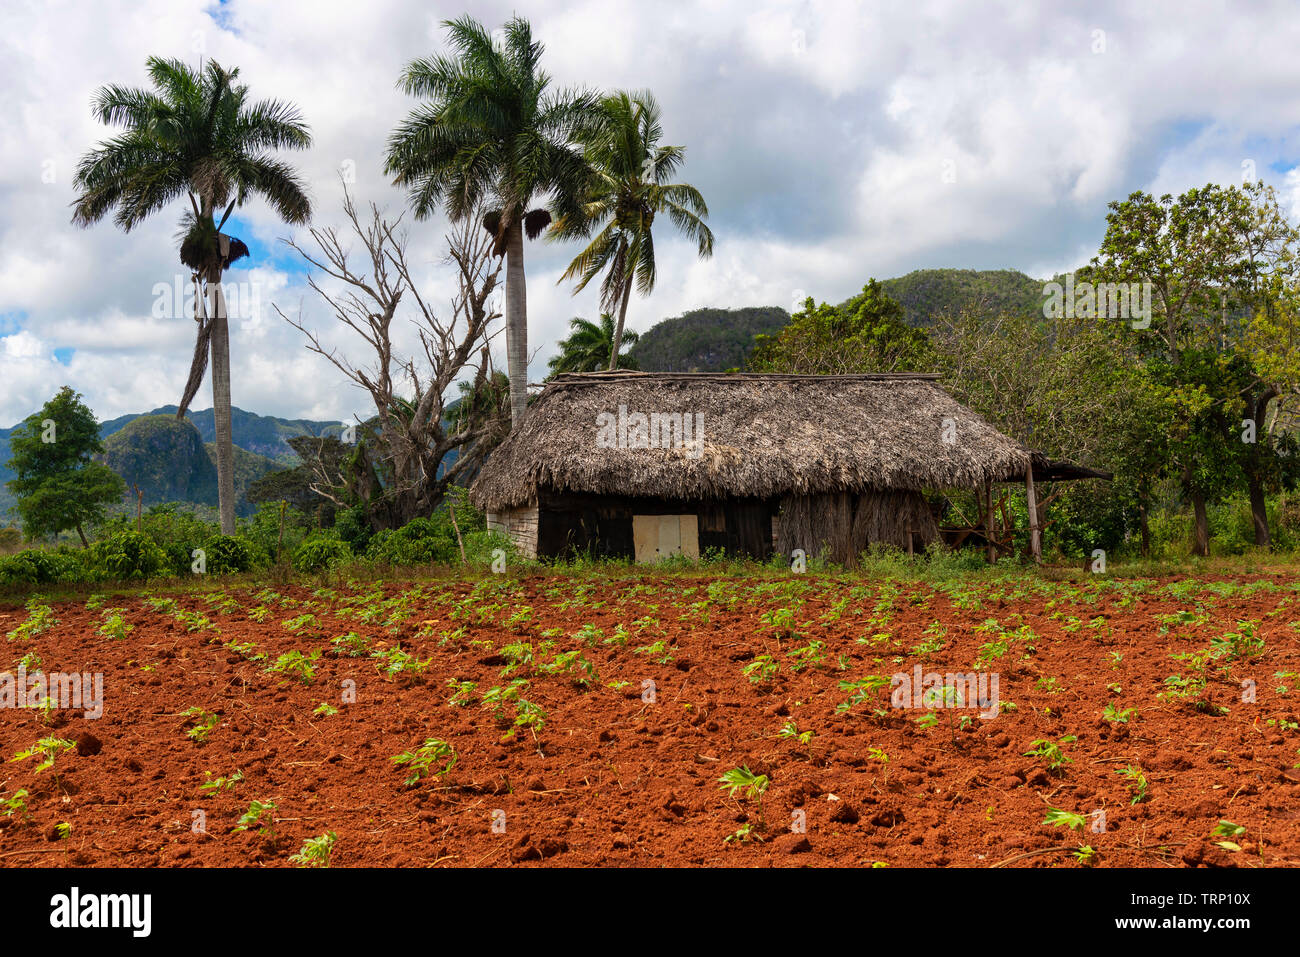 Rural scene in the Vinales Valley where small farms dot the landscape and a crop is growing in the fertile rust-red earth. Vinales, Cuba Stock Photo